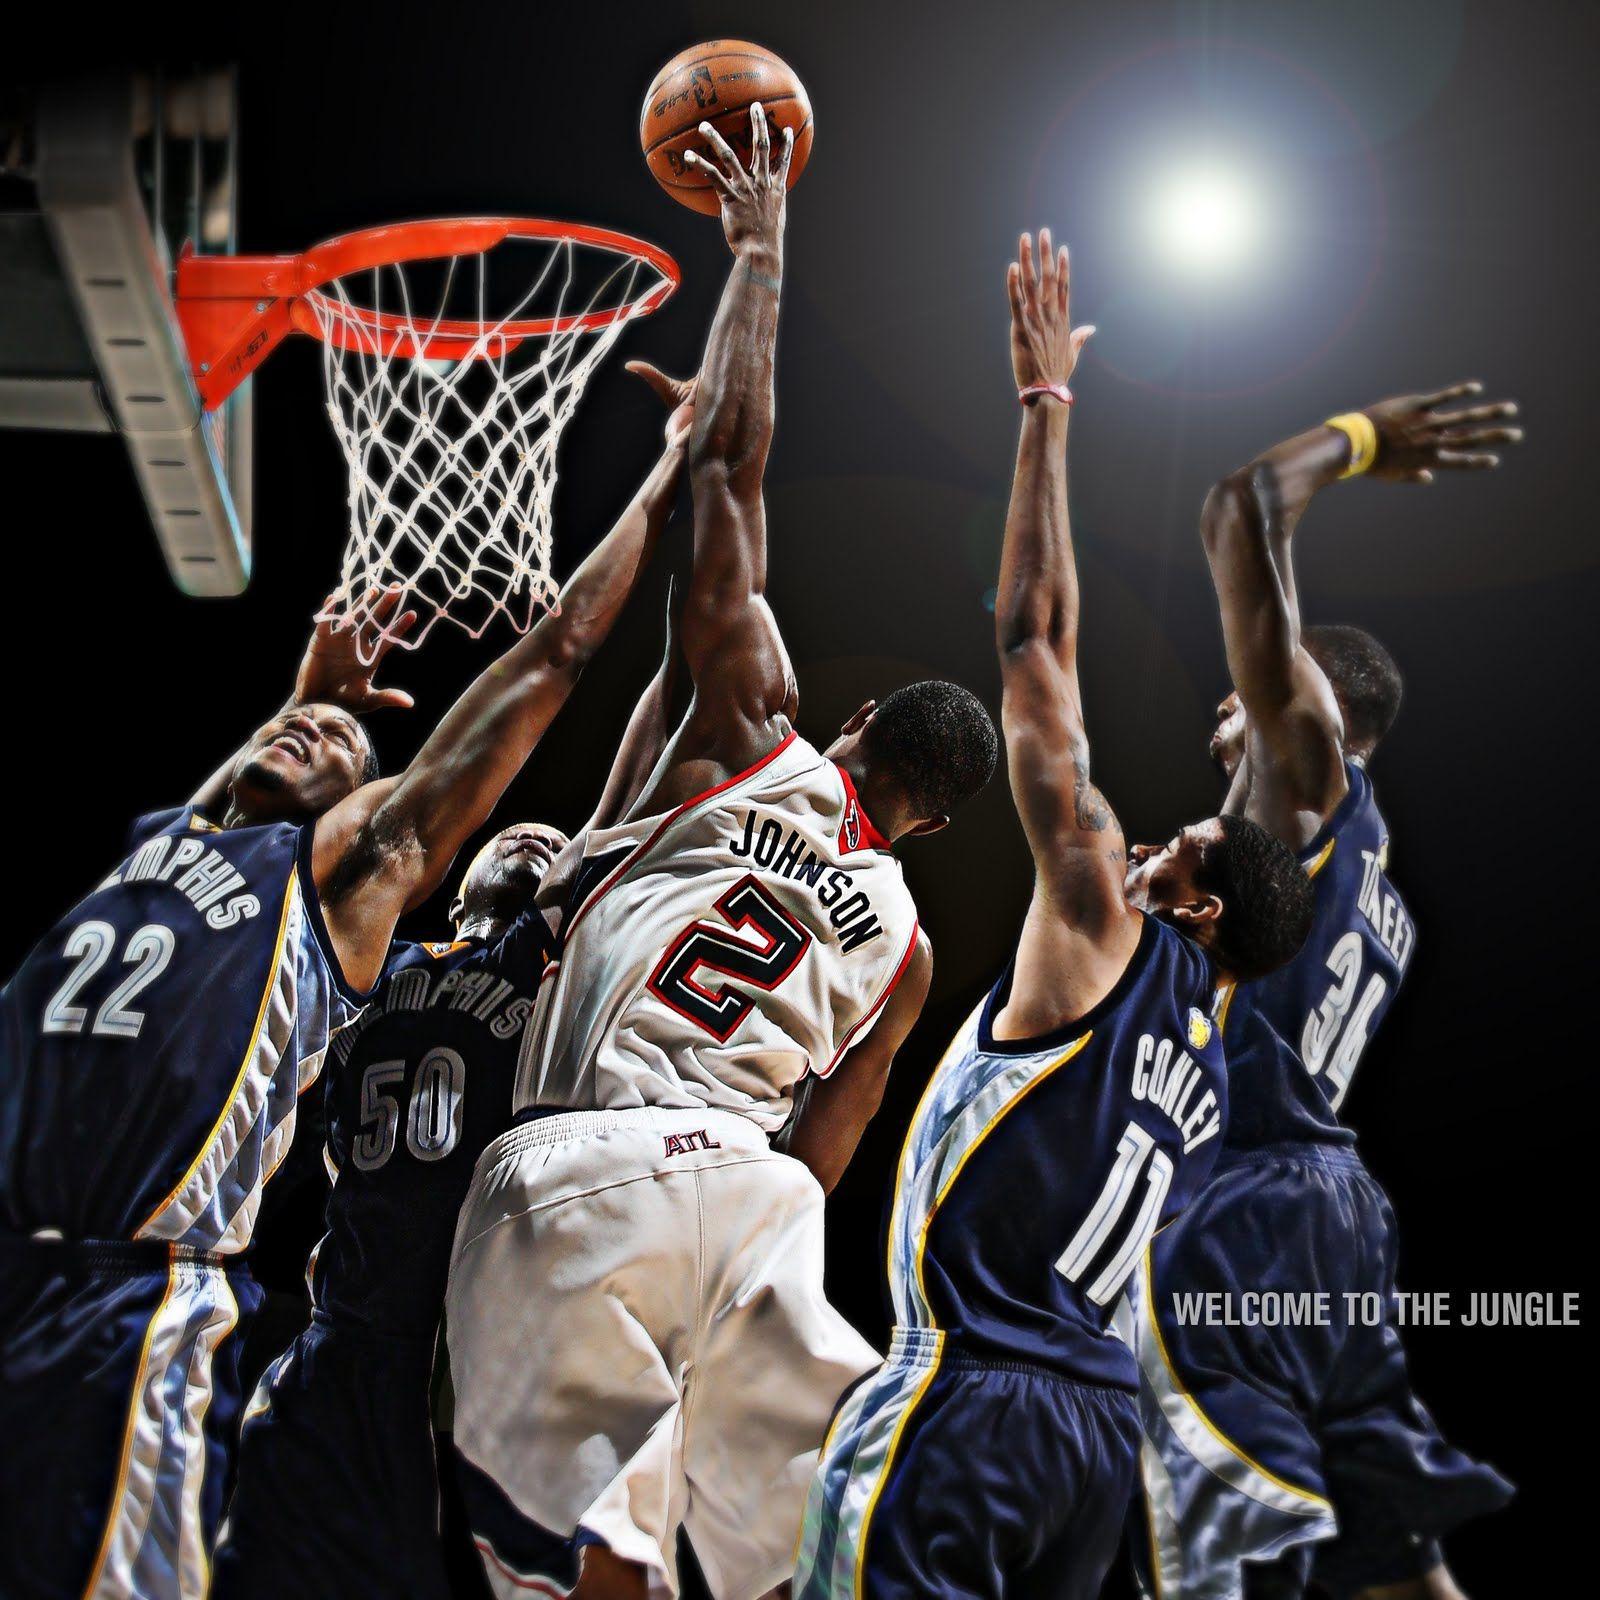 Joe Johnson Basketball Profile And Picture Image. Top Sports